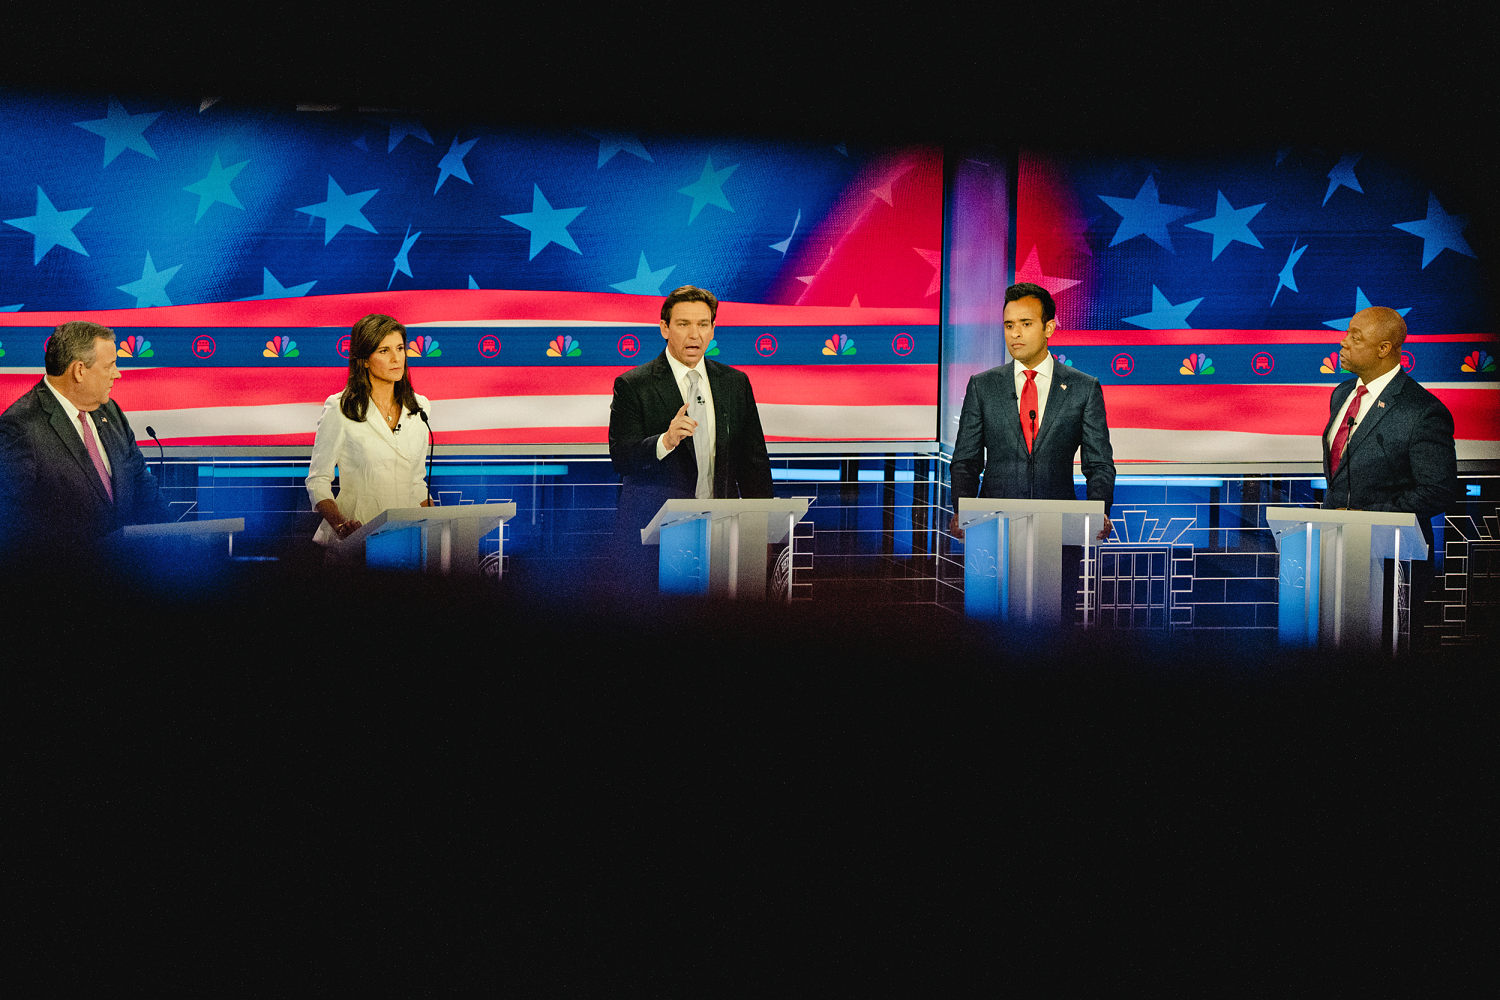 Candidates clamor to be seen as closest to Israel in GOP debate